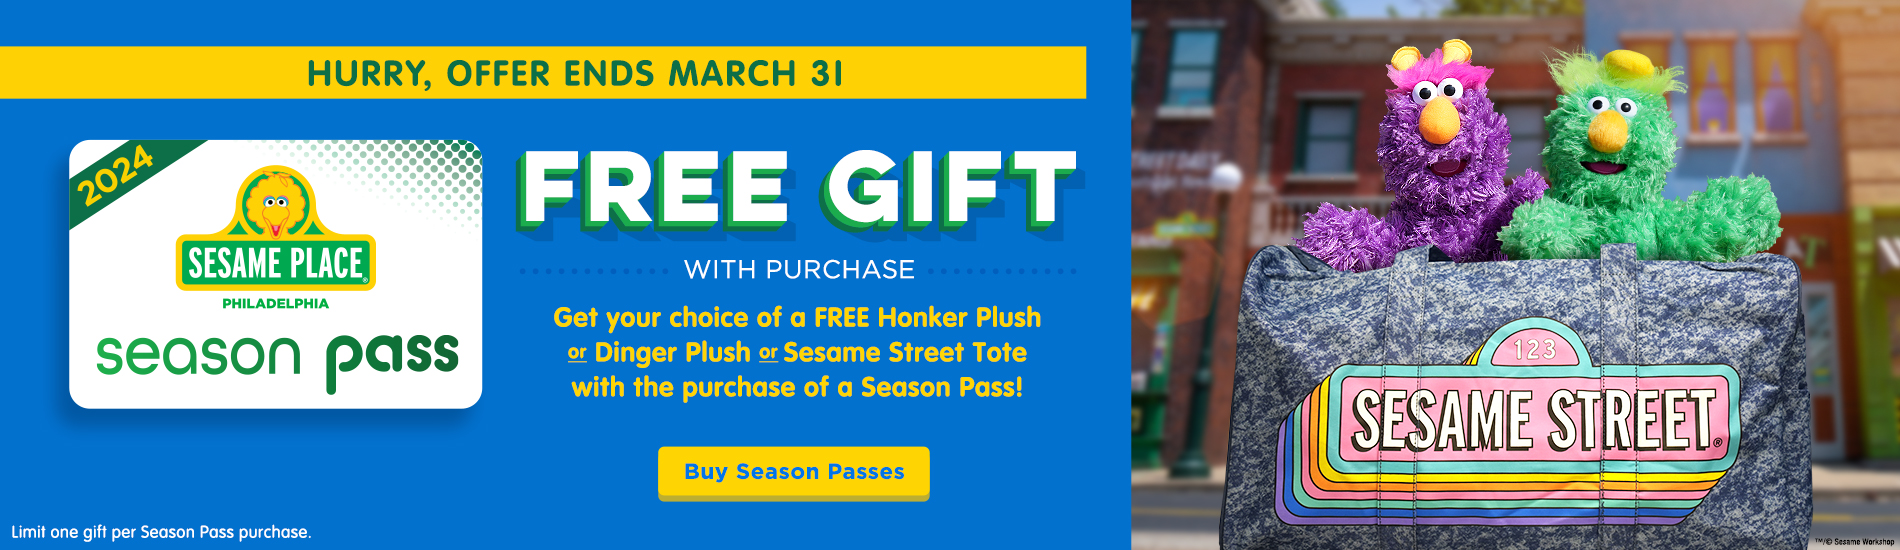 Free Gift with purchase of a Season Pass. Hurry, offer ends March 31